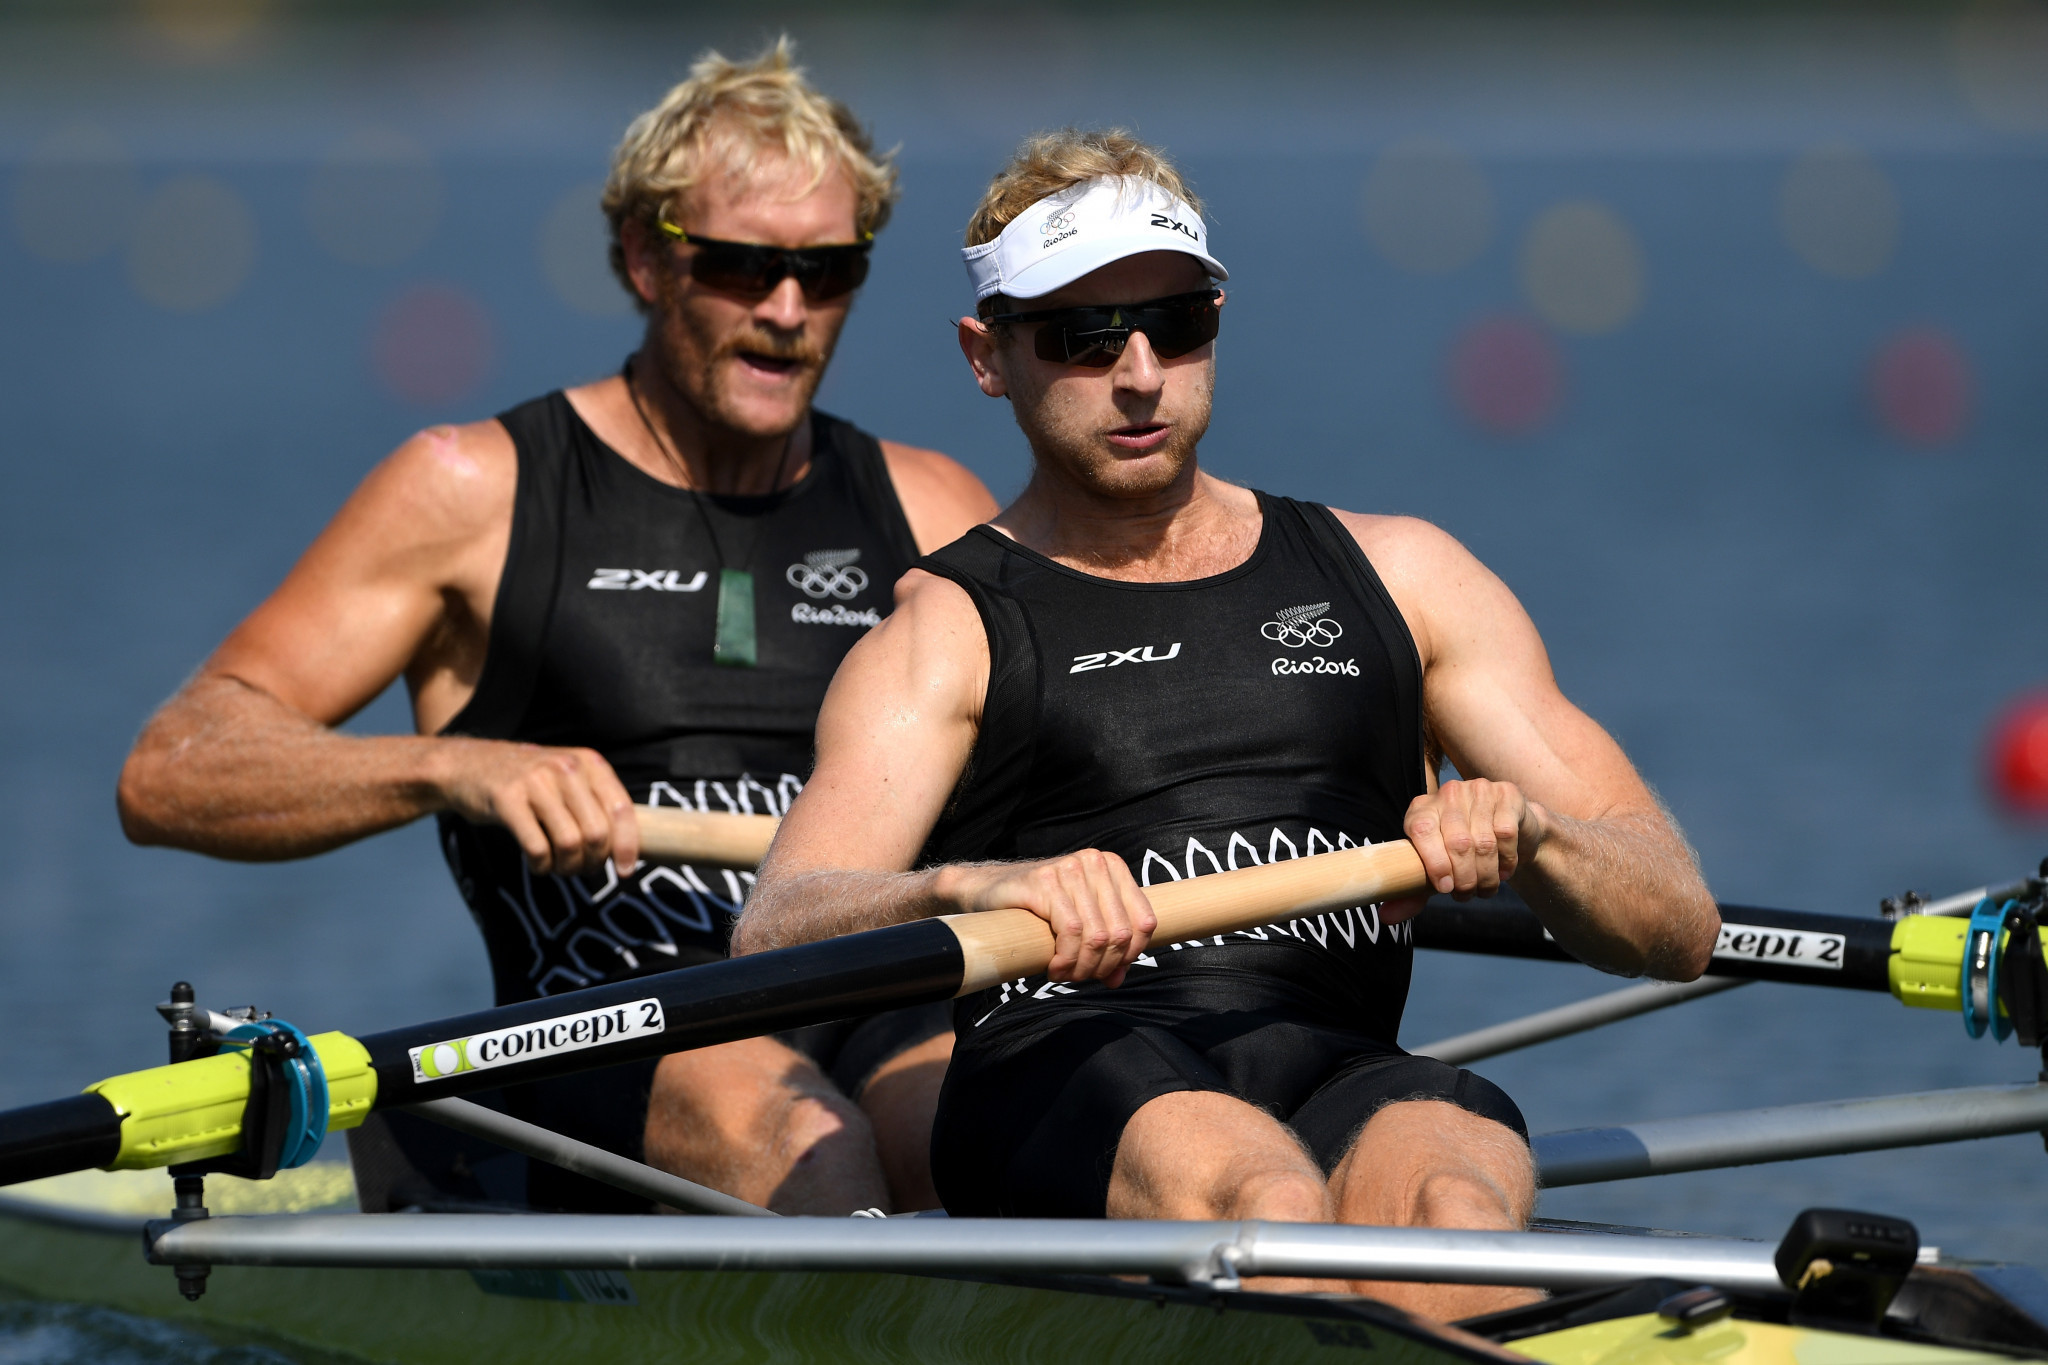 Double Olympic champion Bond switches back to rowing from cycling and aims for Tokyo 2020